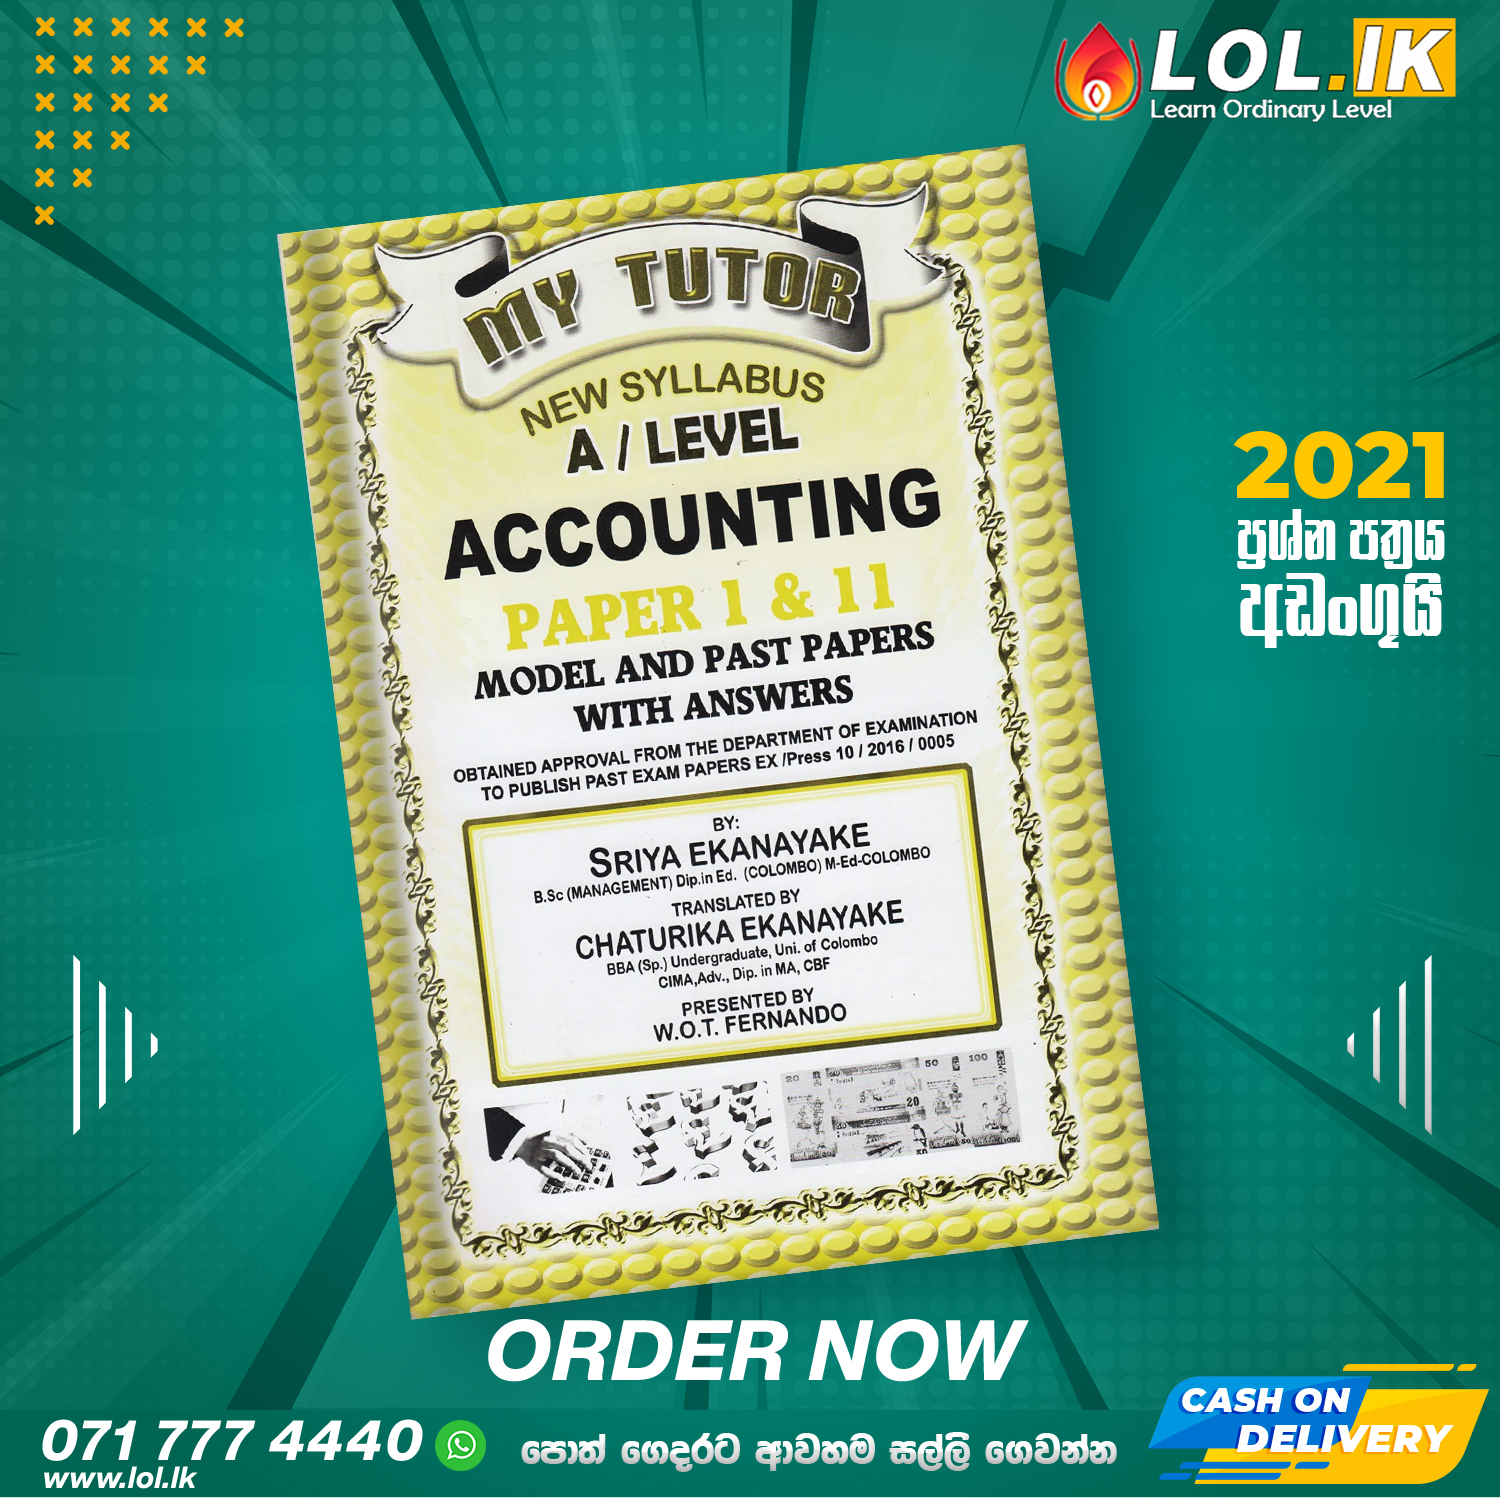 English Medium A/L Accounting Past Paper Book with Answers - My Tutor